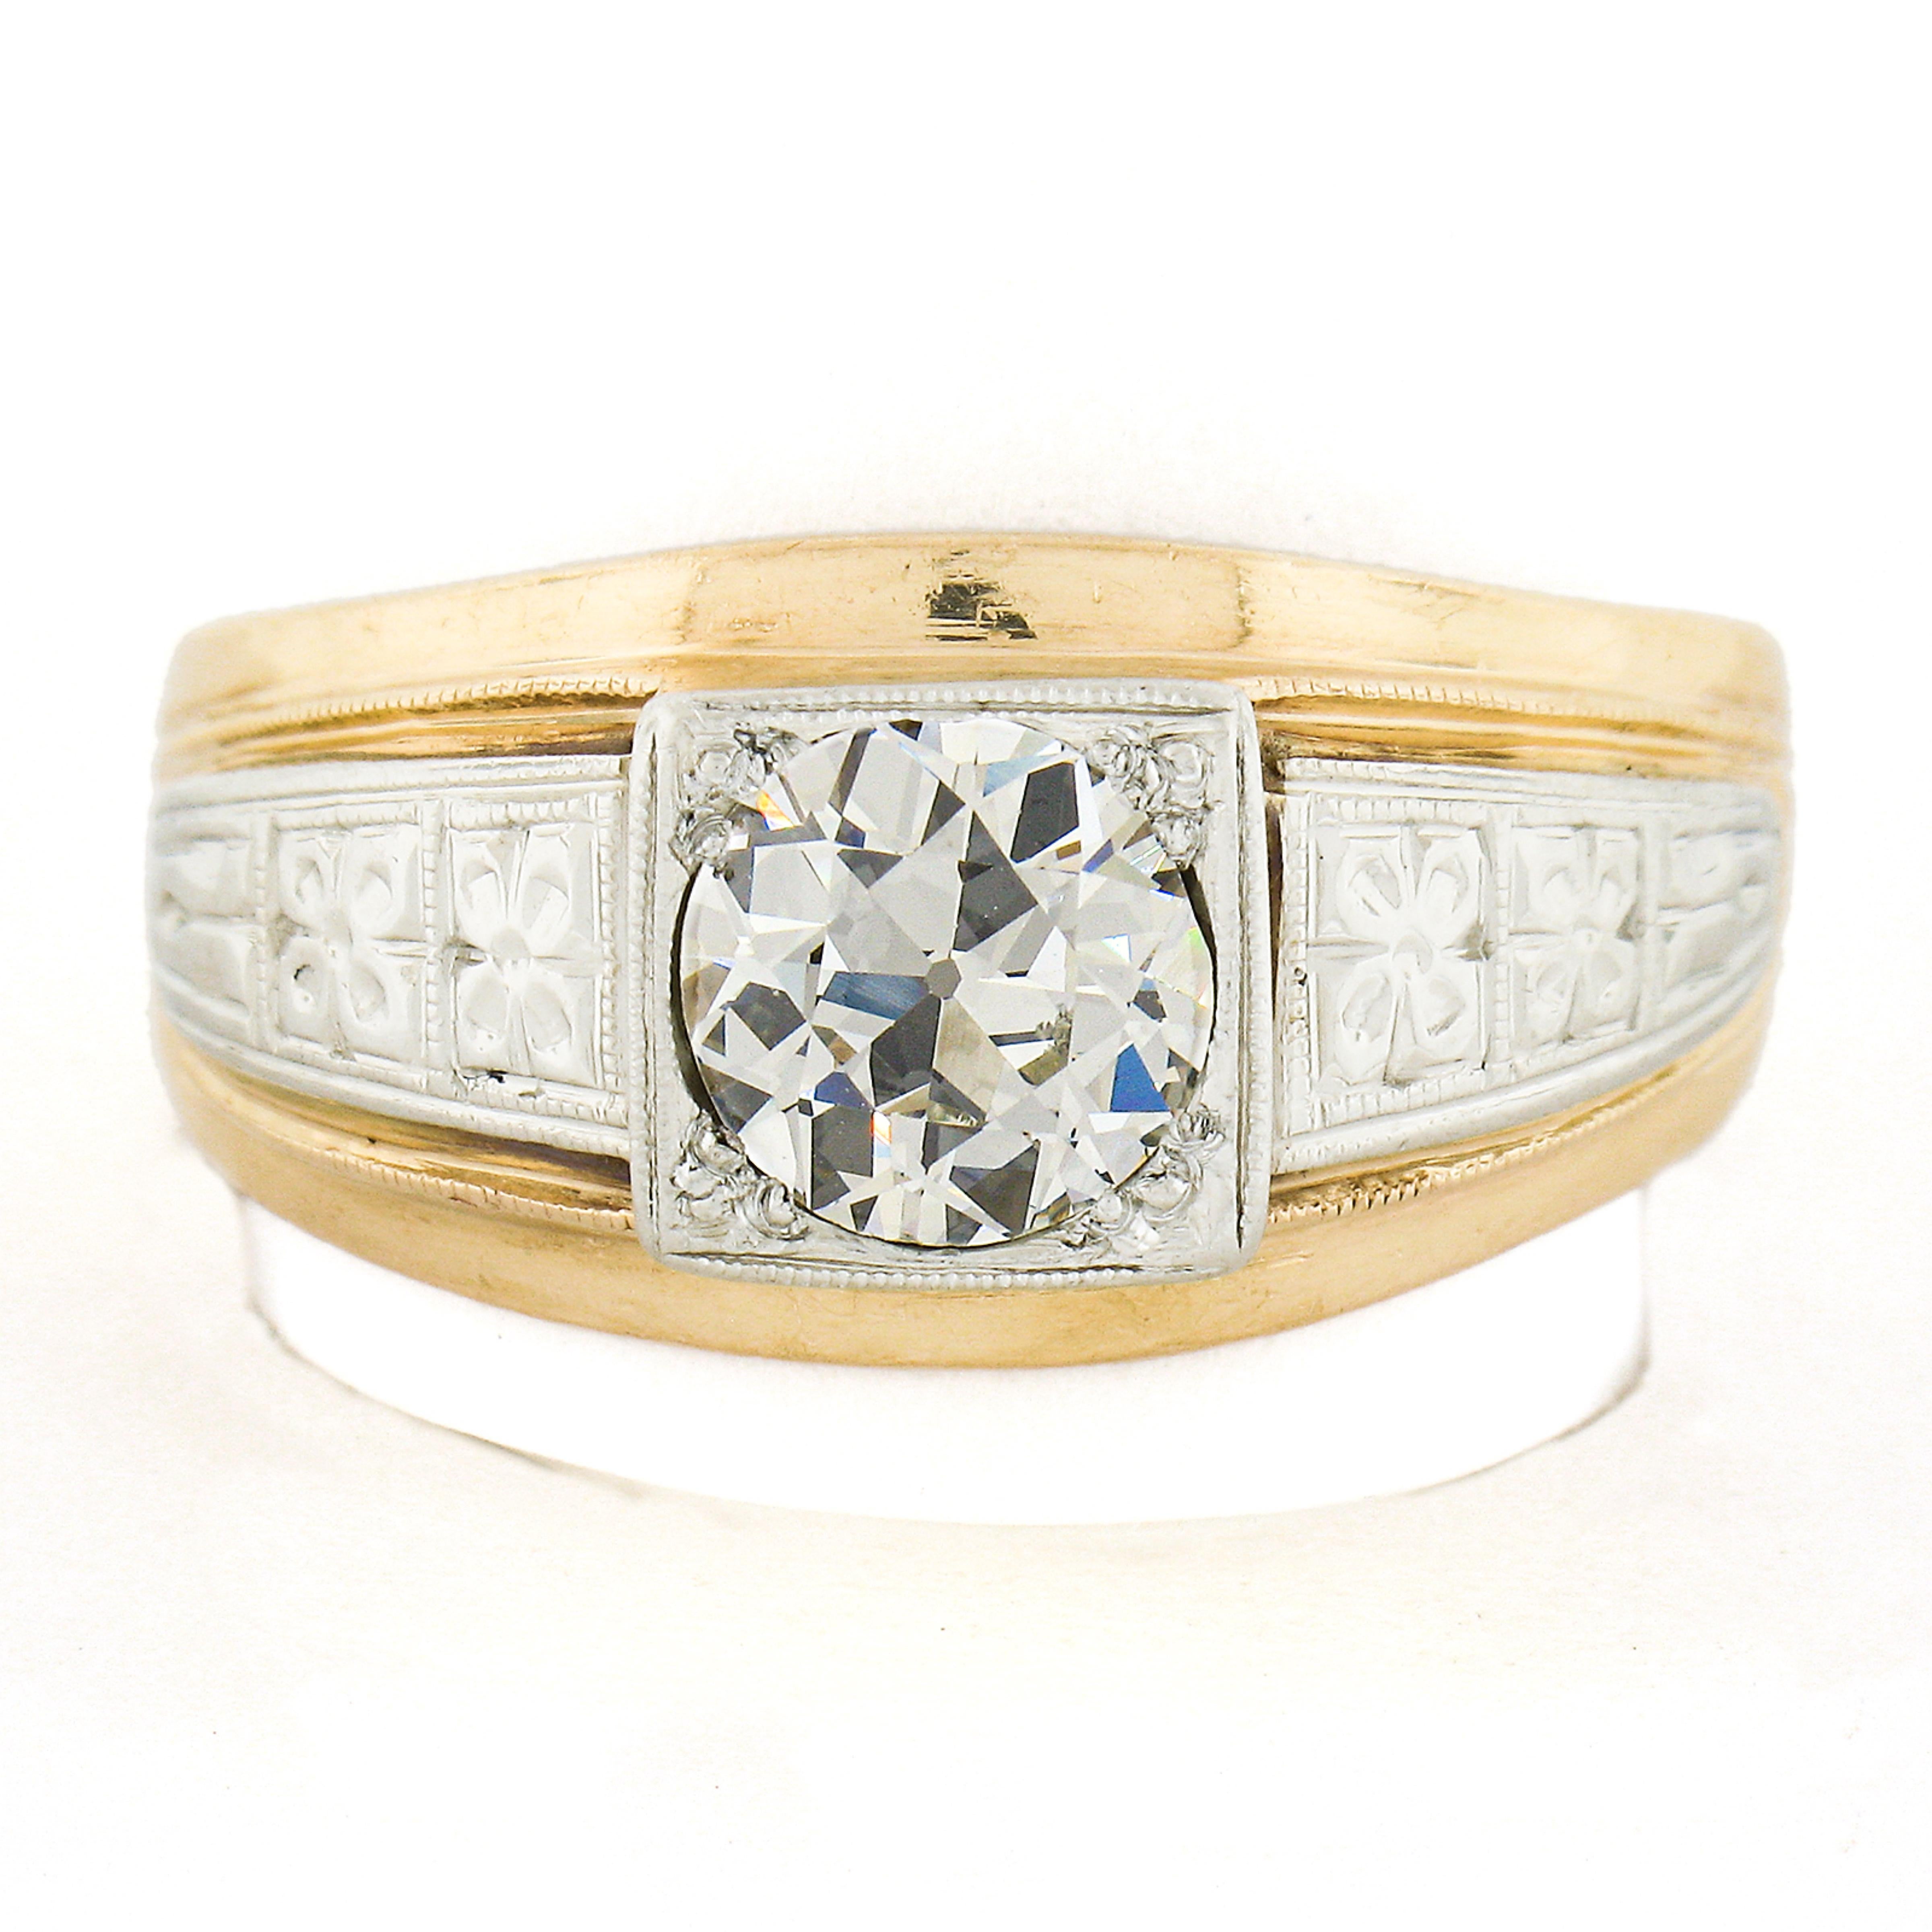 This antique men's ring was crafted during the 1930's in solid 14k yellow gold with white gold shoulders that are adorned with wonderful floral patterns. The ring is set with a solitaire old European cut diamond that is neatly pave set at the center